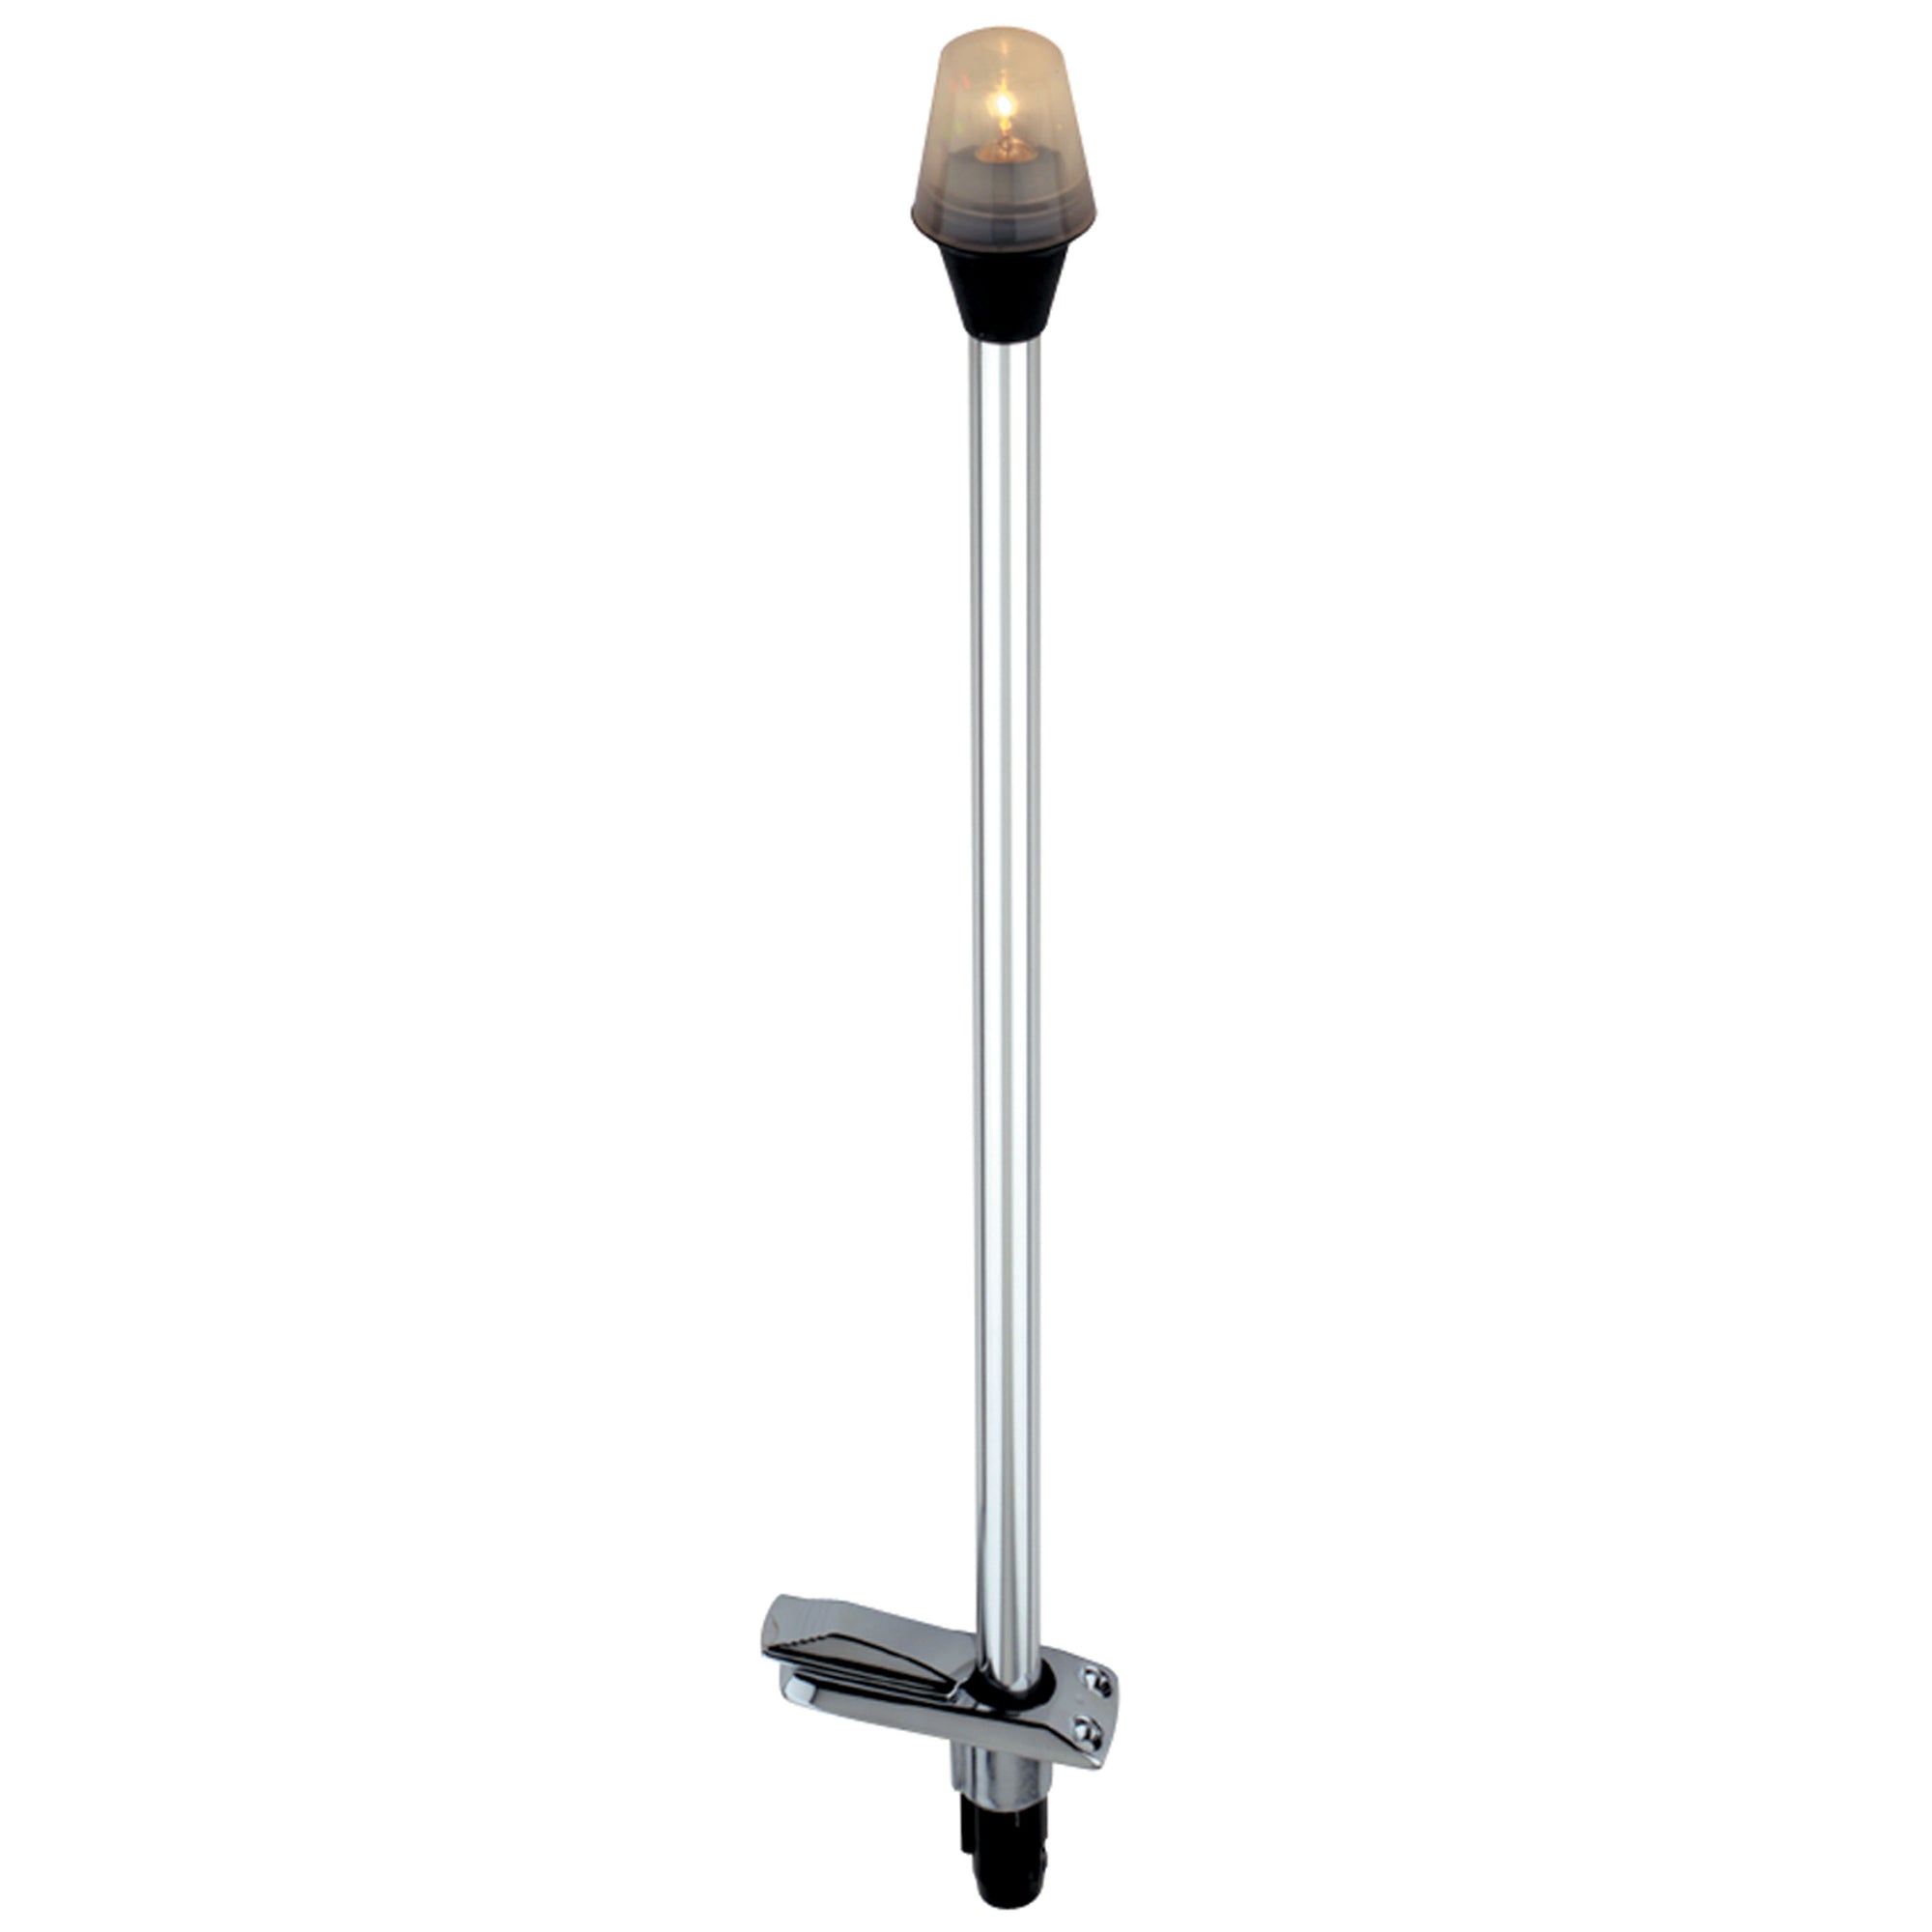 Attwood 7100B7 Stowaway Two-Mile Pole Light with Plug-In Base - 30 in.